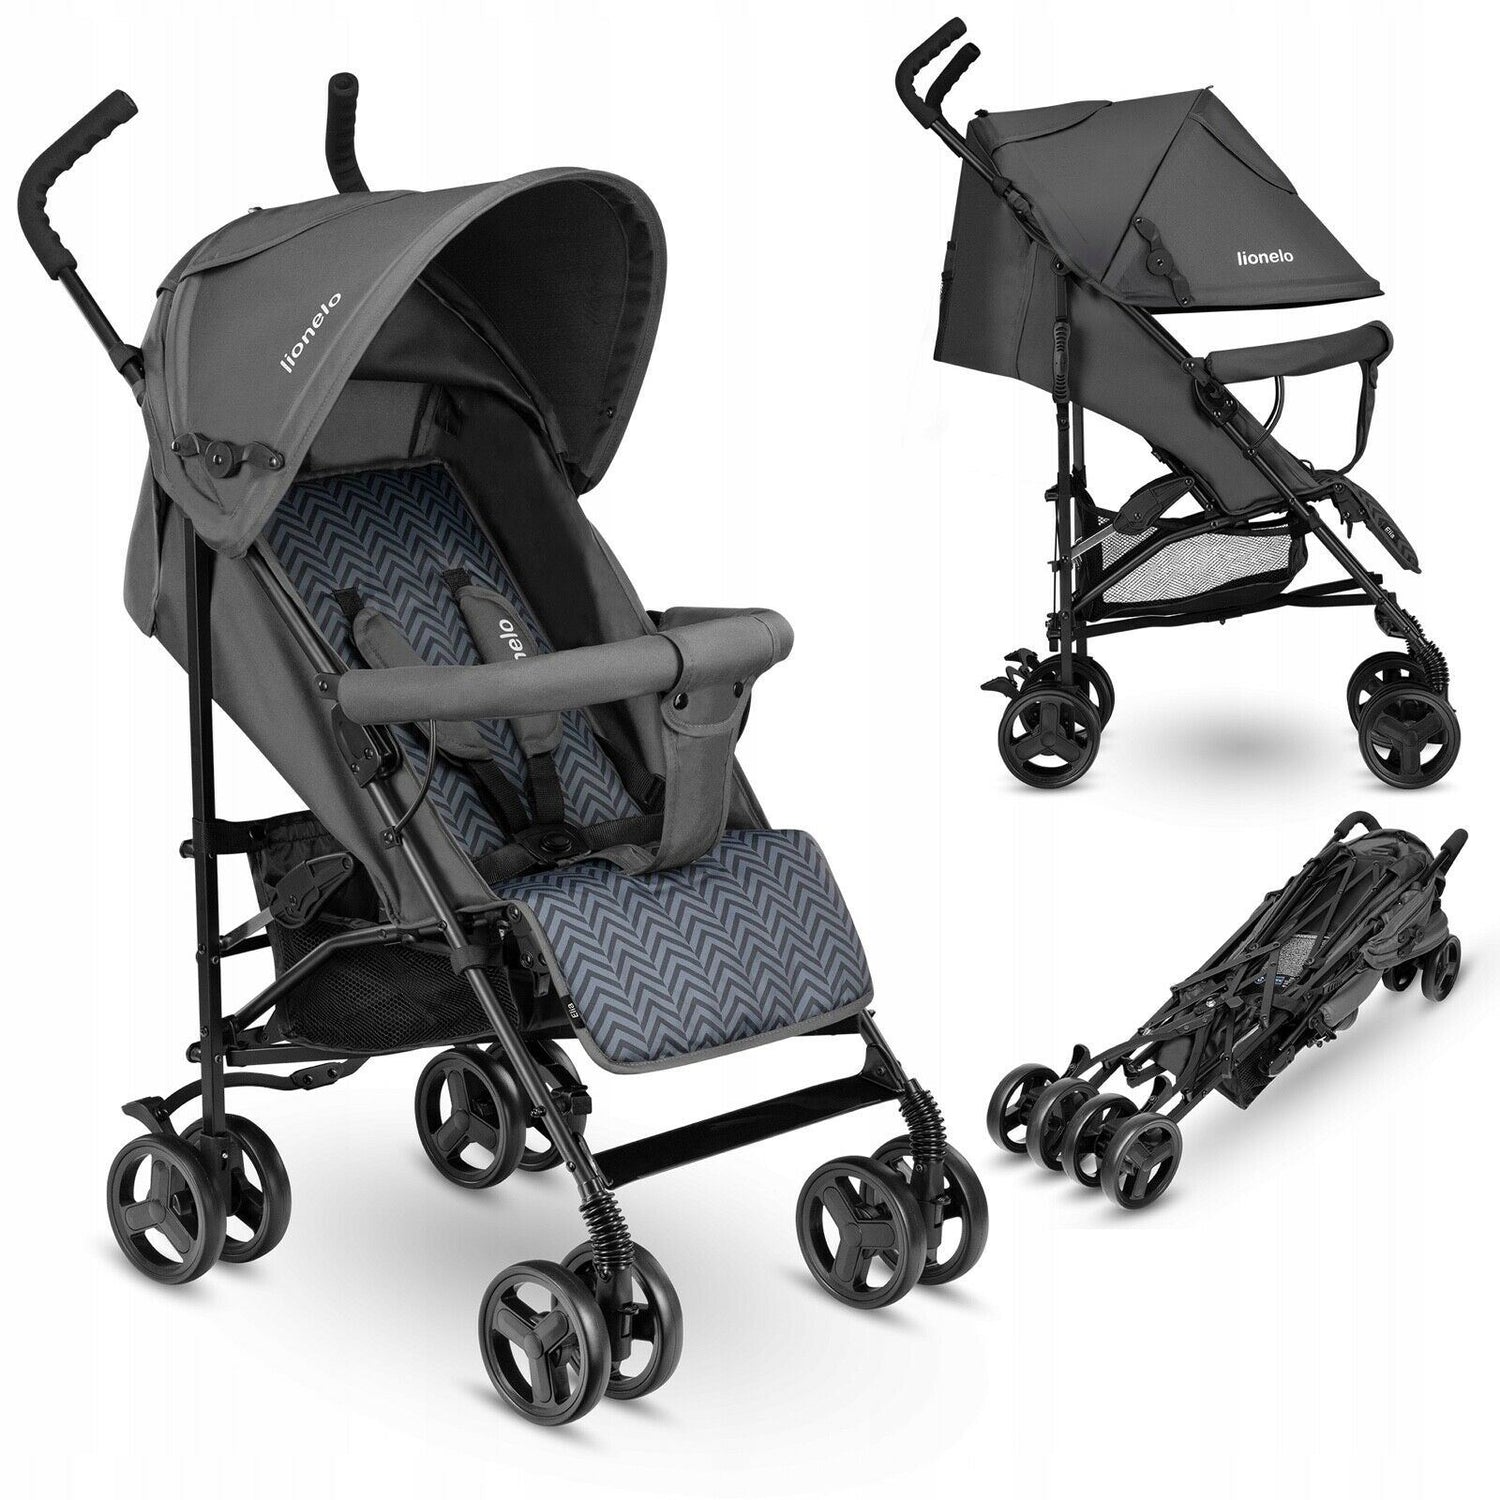 Baby Stroller Kids Pushchair Buggy With Rain Cover & Mosquito Net Elia Lionelo Graphite